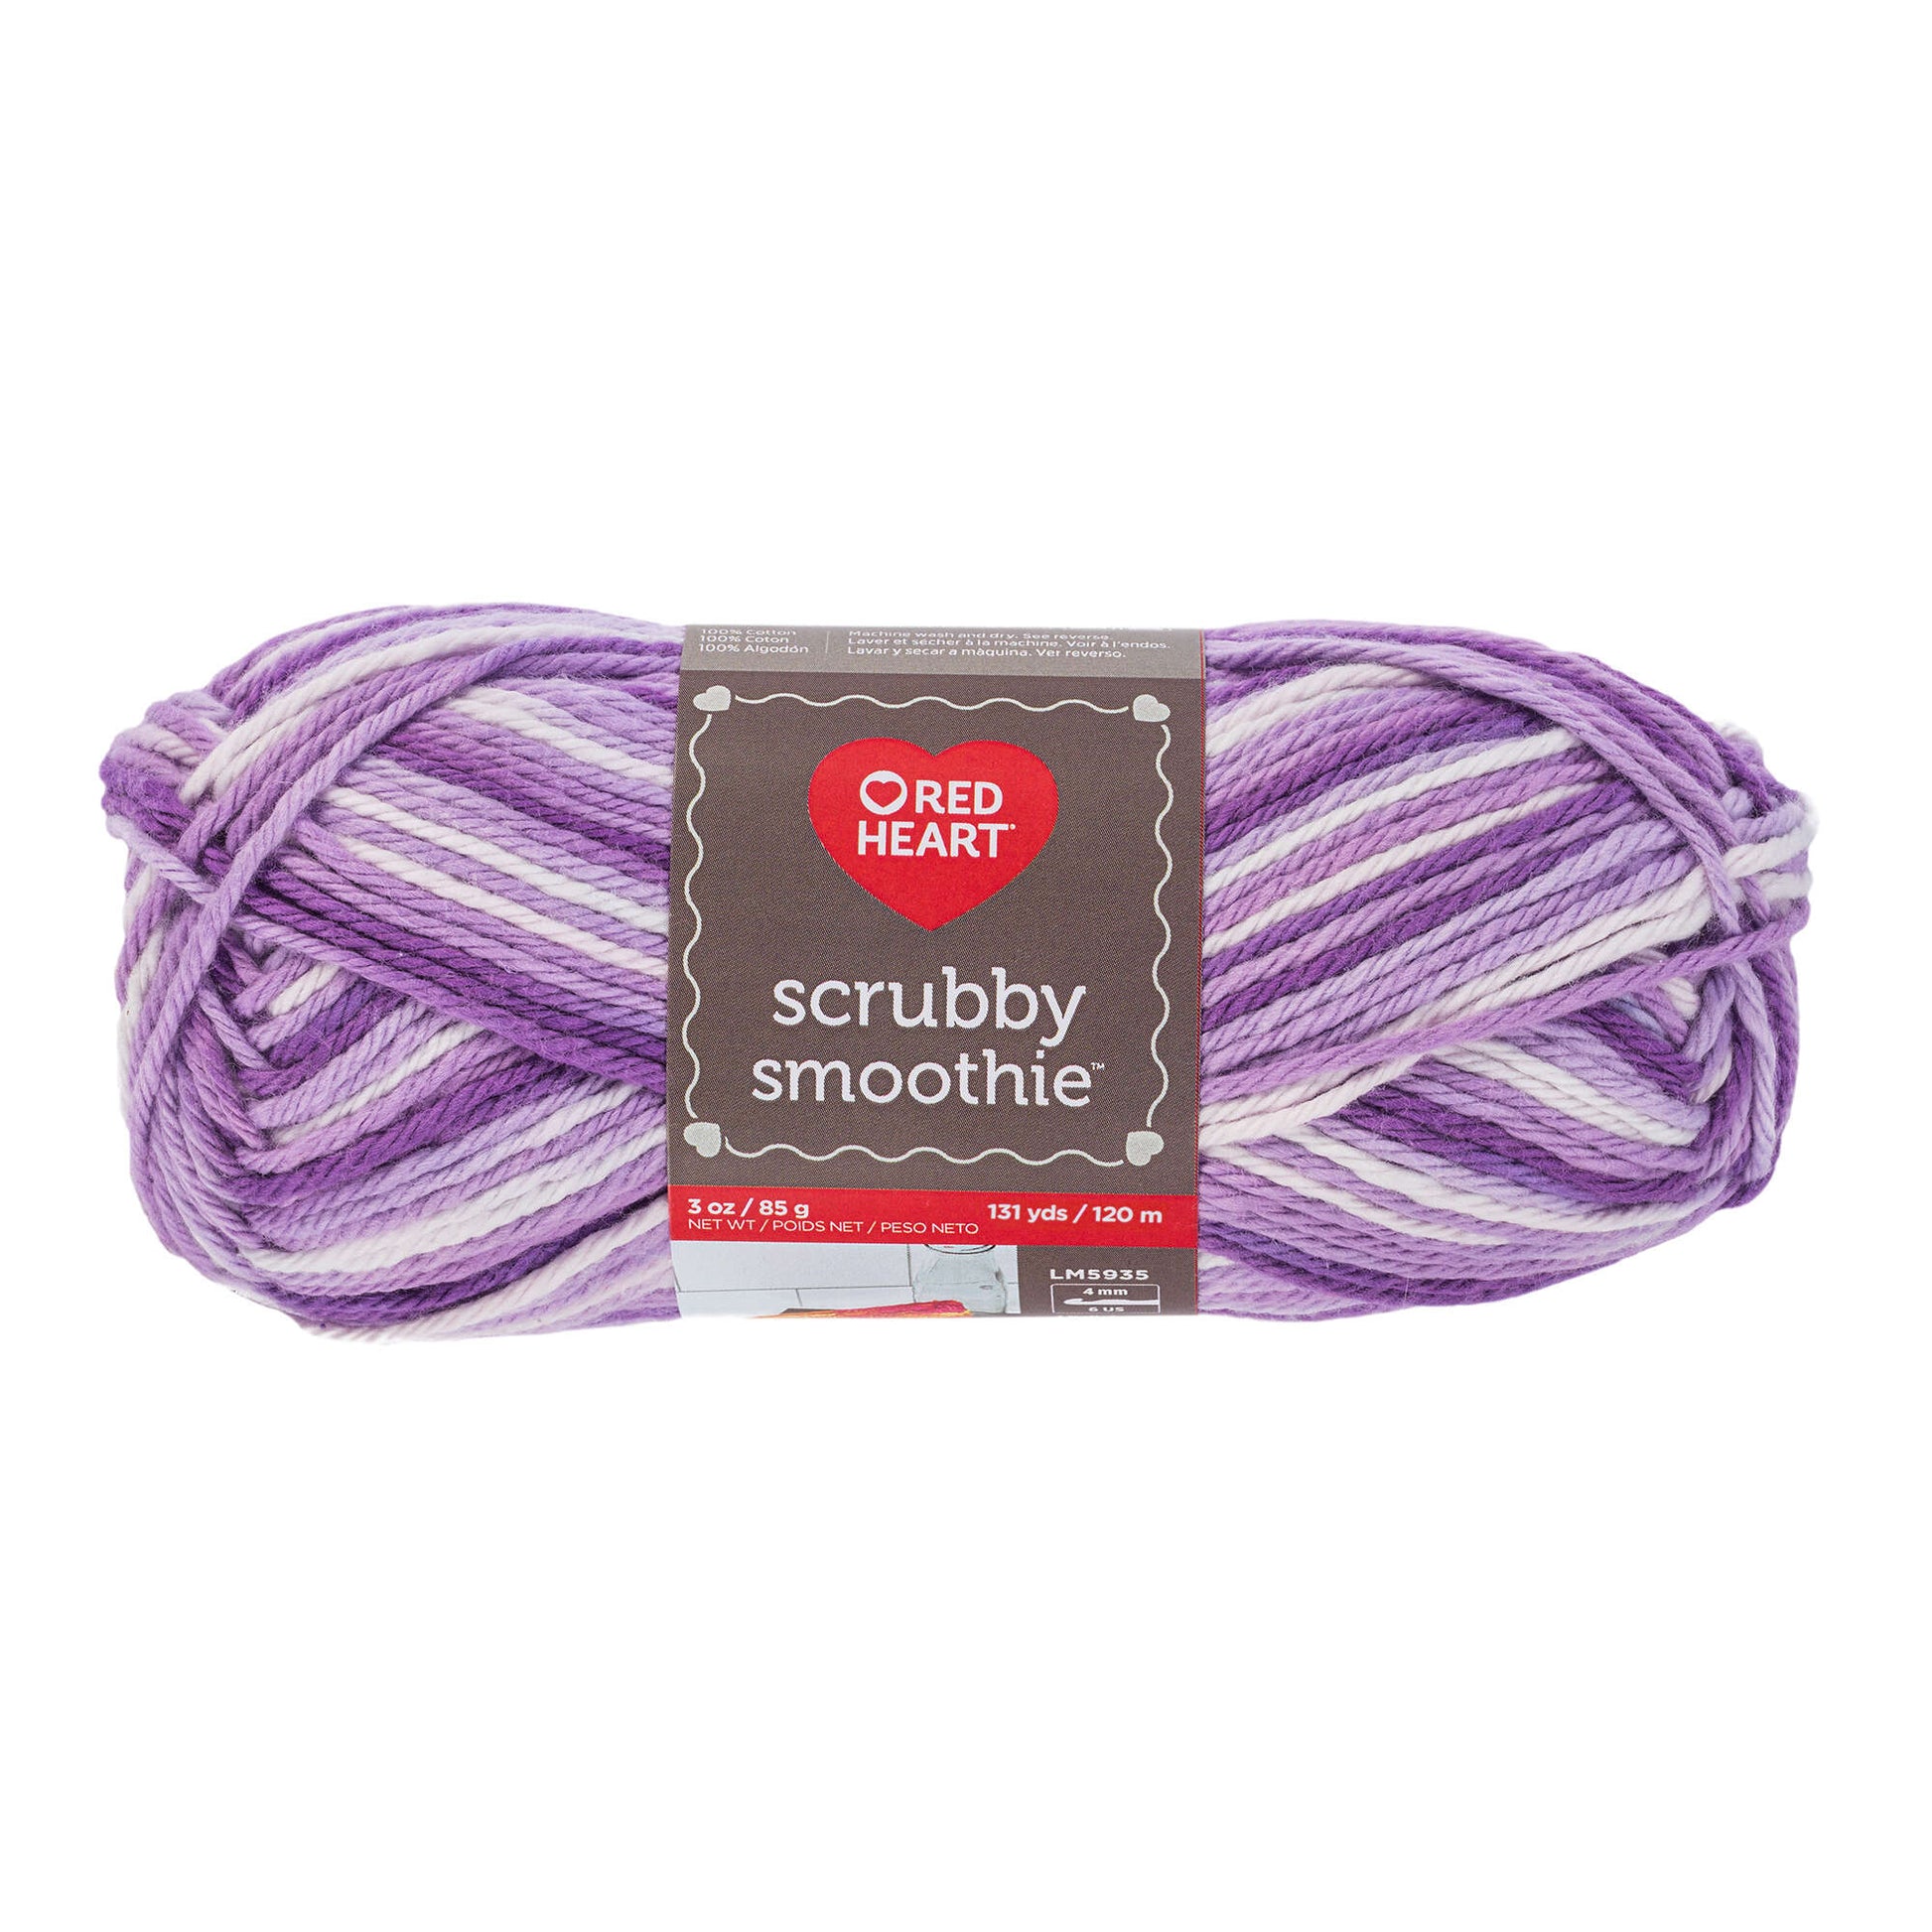 Red Heart Scrubby Smoothie Yarn - Clearance shades Purple Tones